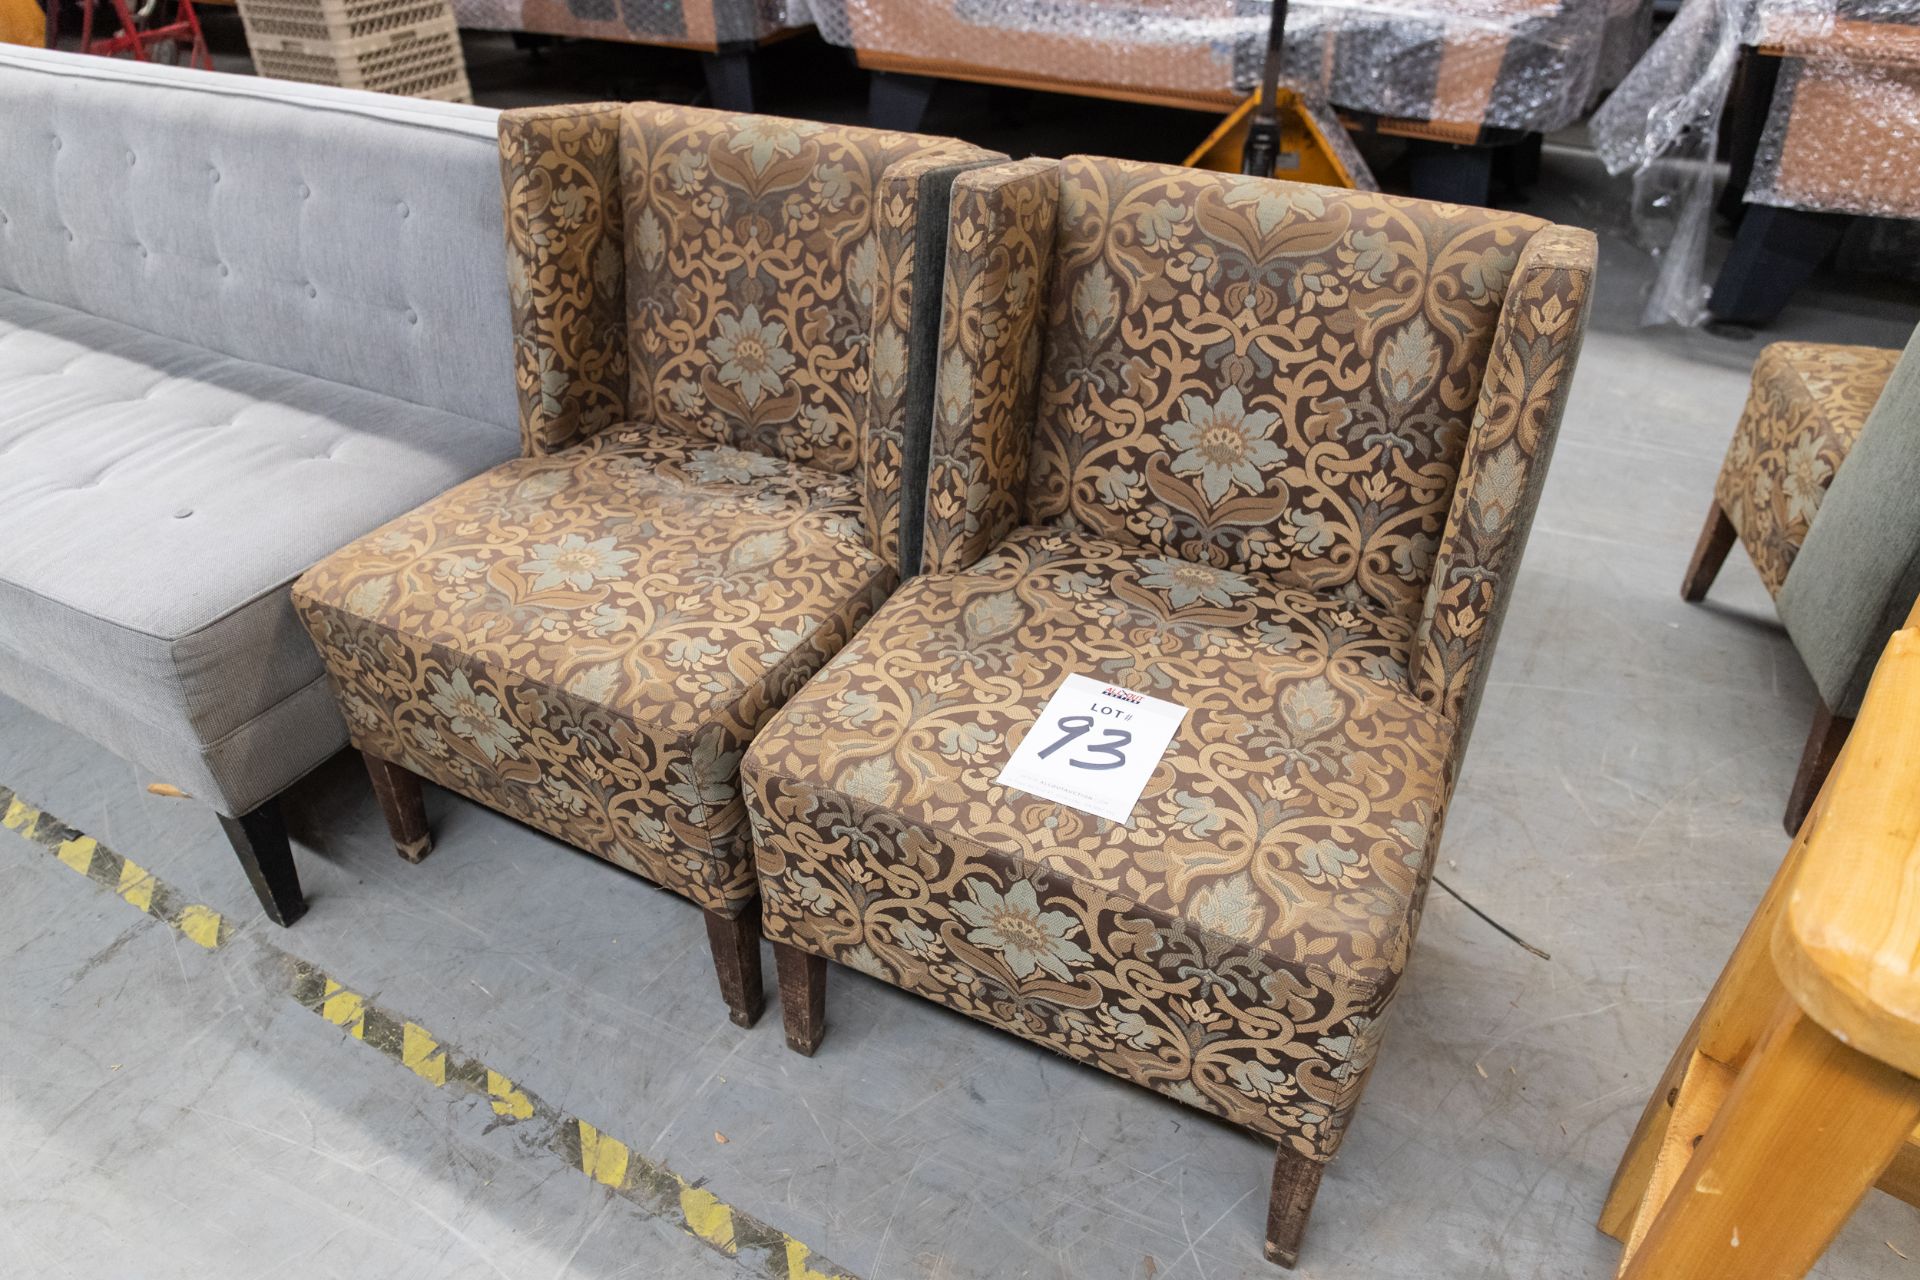 2 UPHOLSTERED LOUNGE CHAIRS - Image 2 of 4